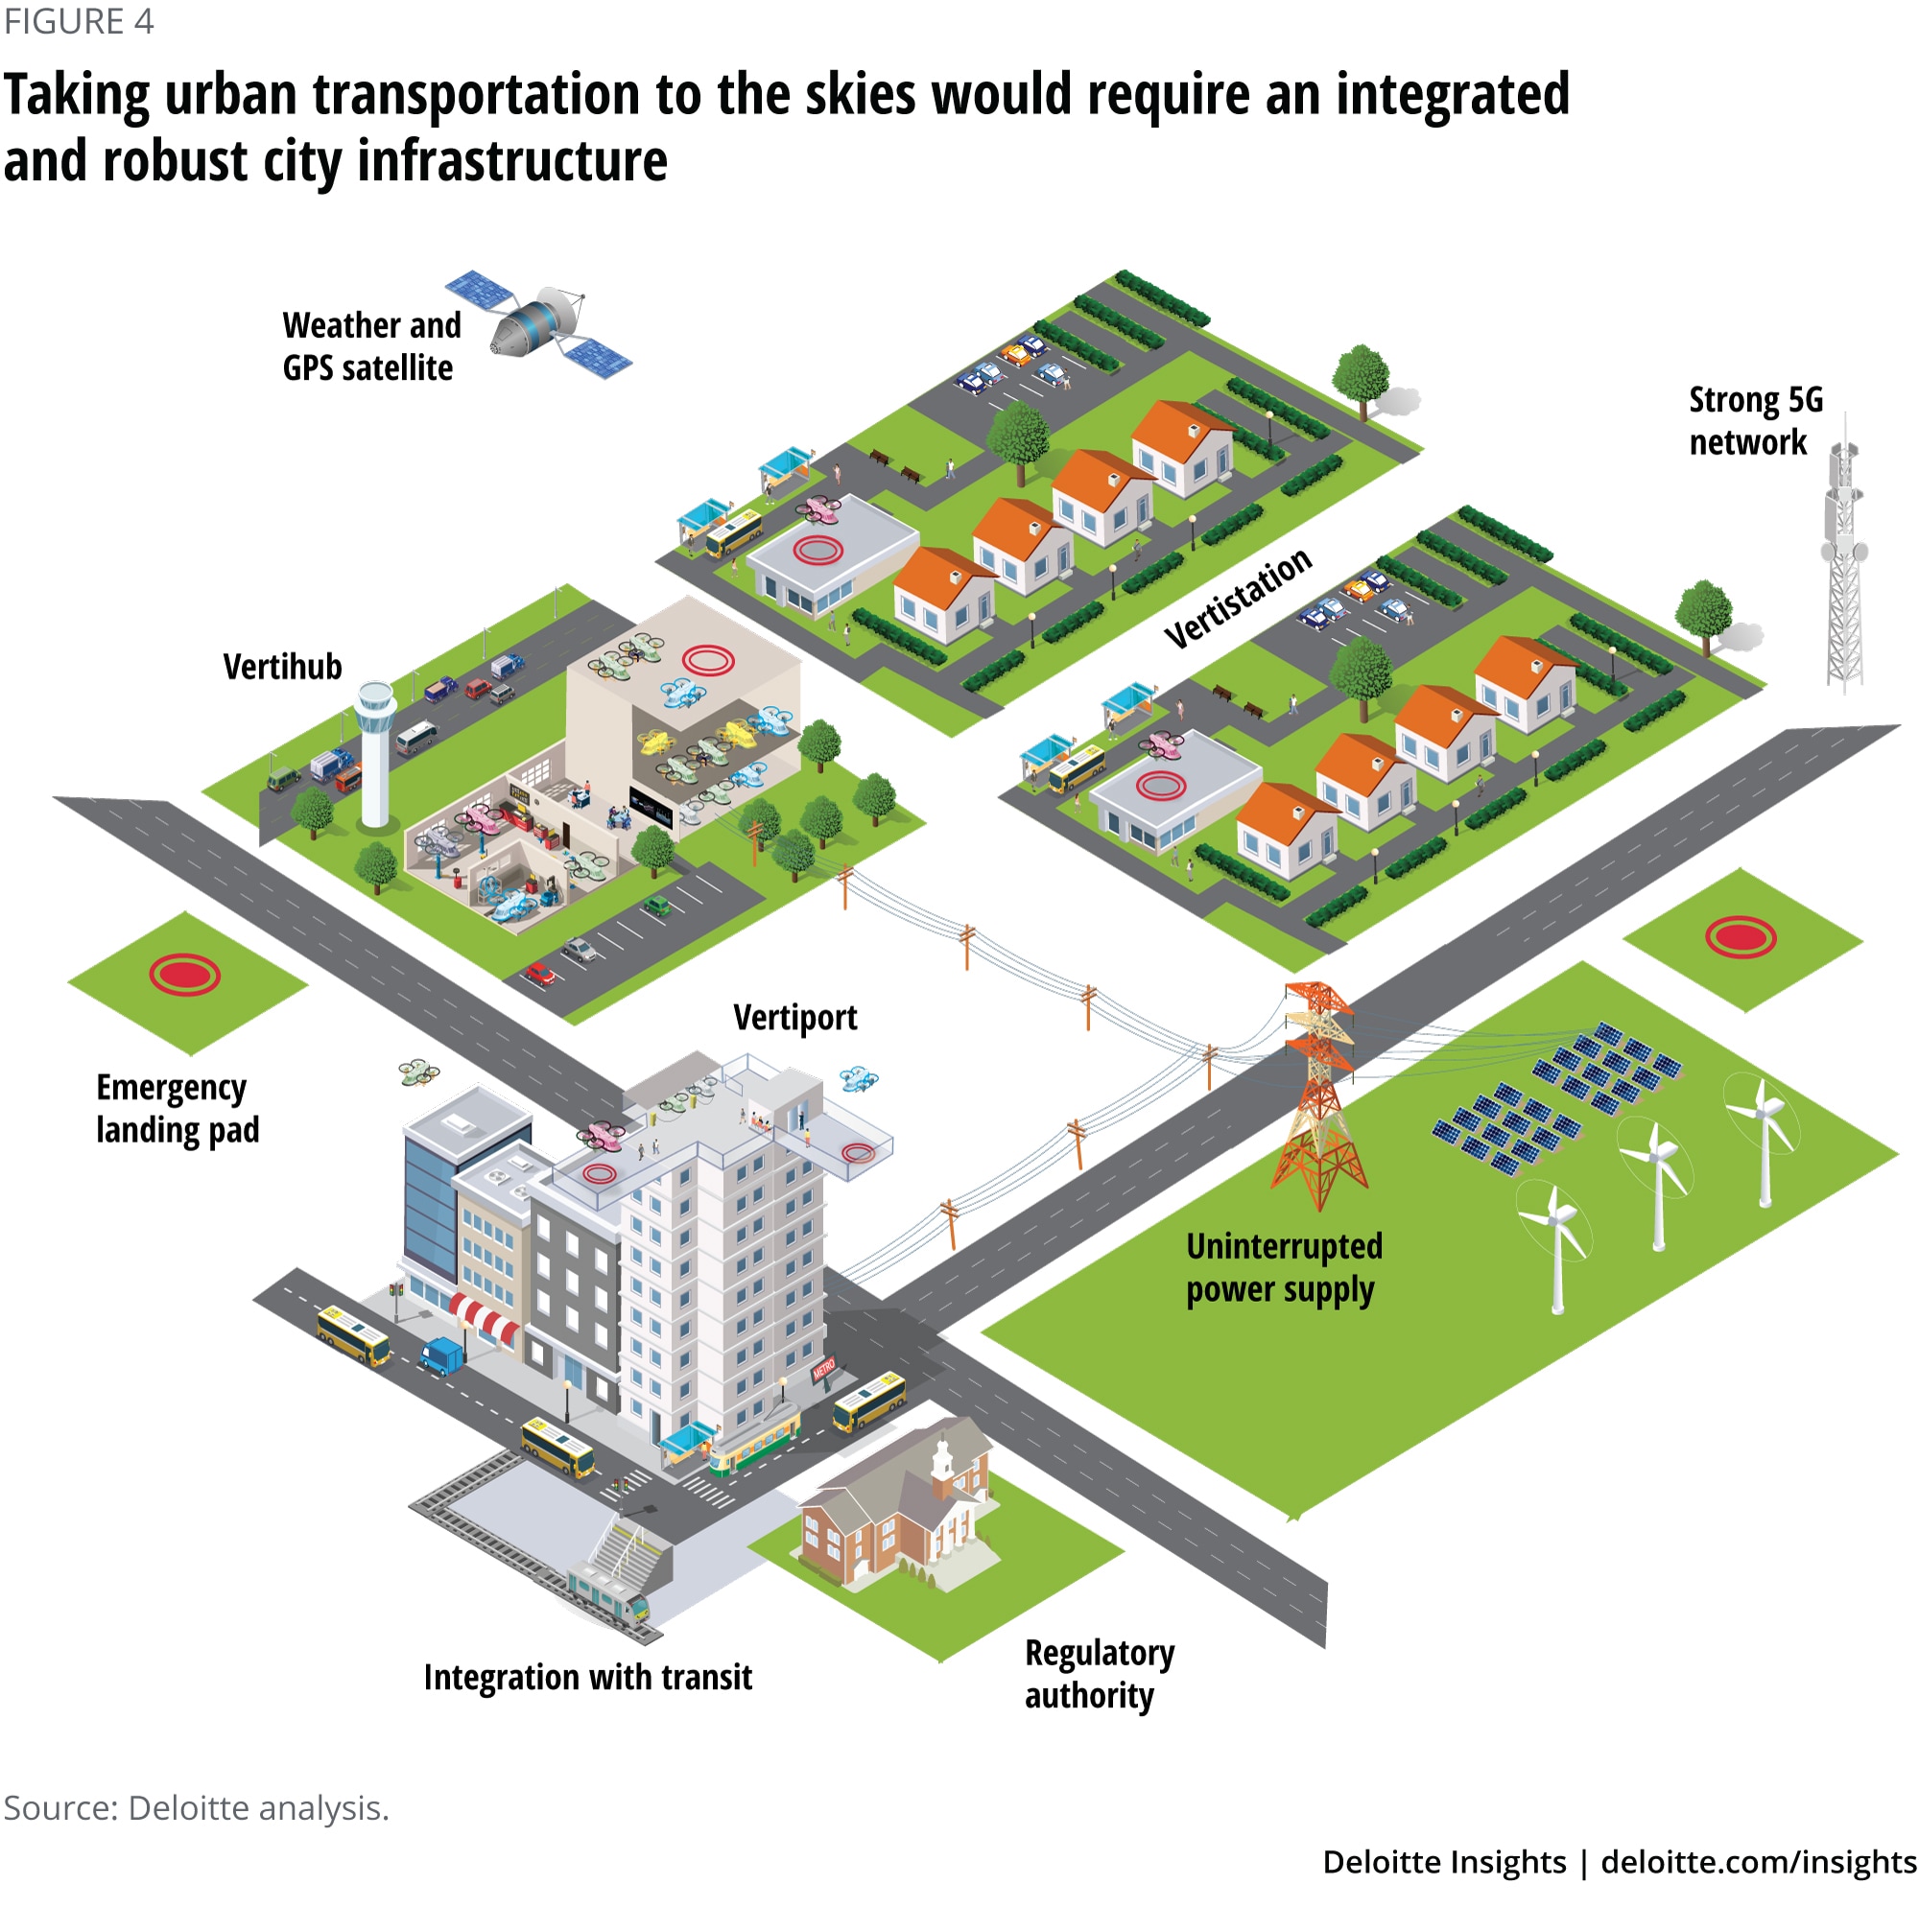 Taking urban transportation to the skies would require an integrated and robust city infrastructure